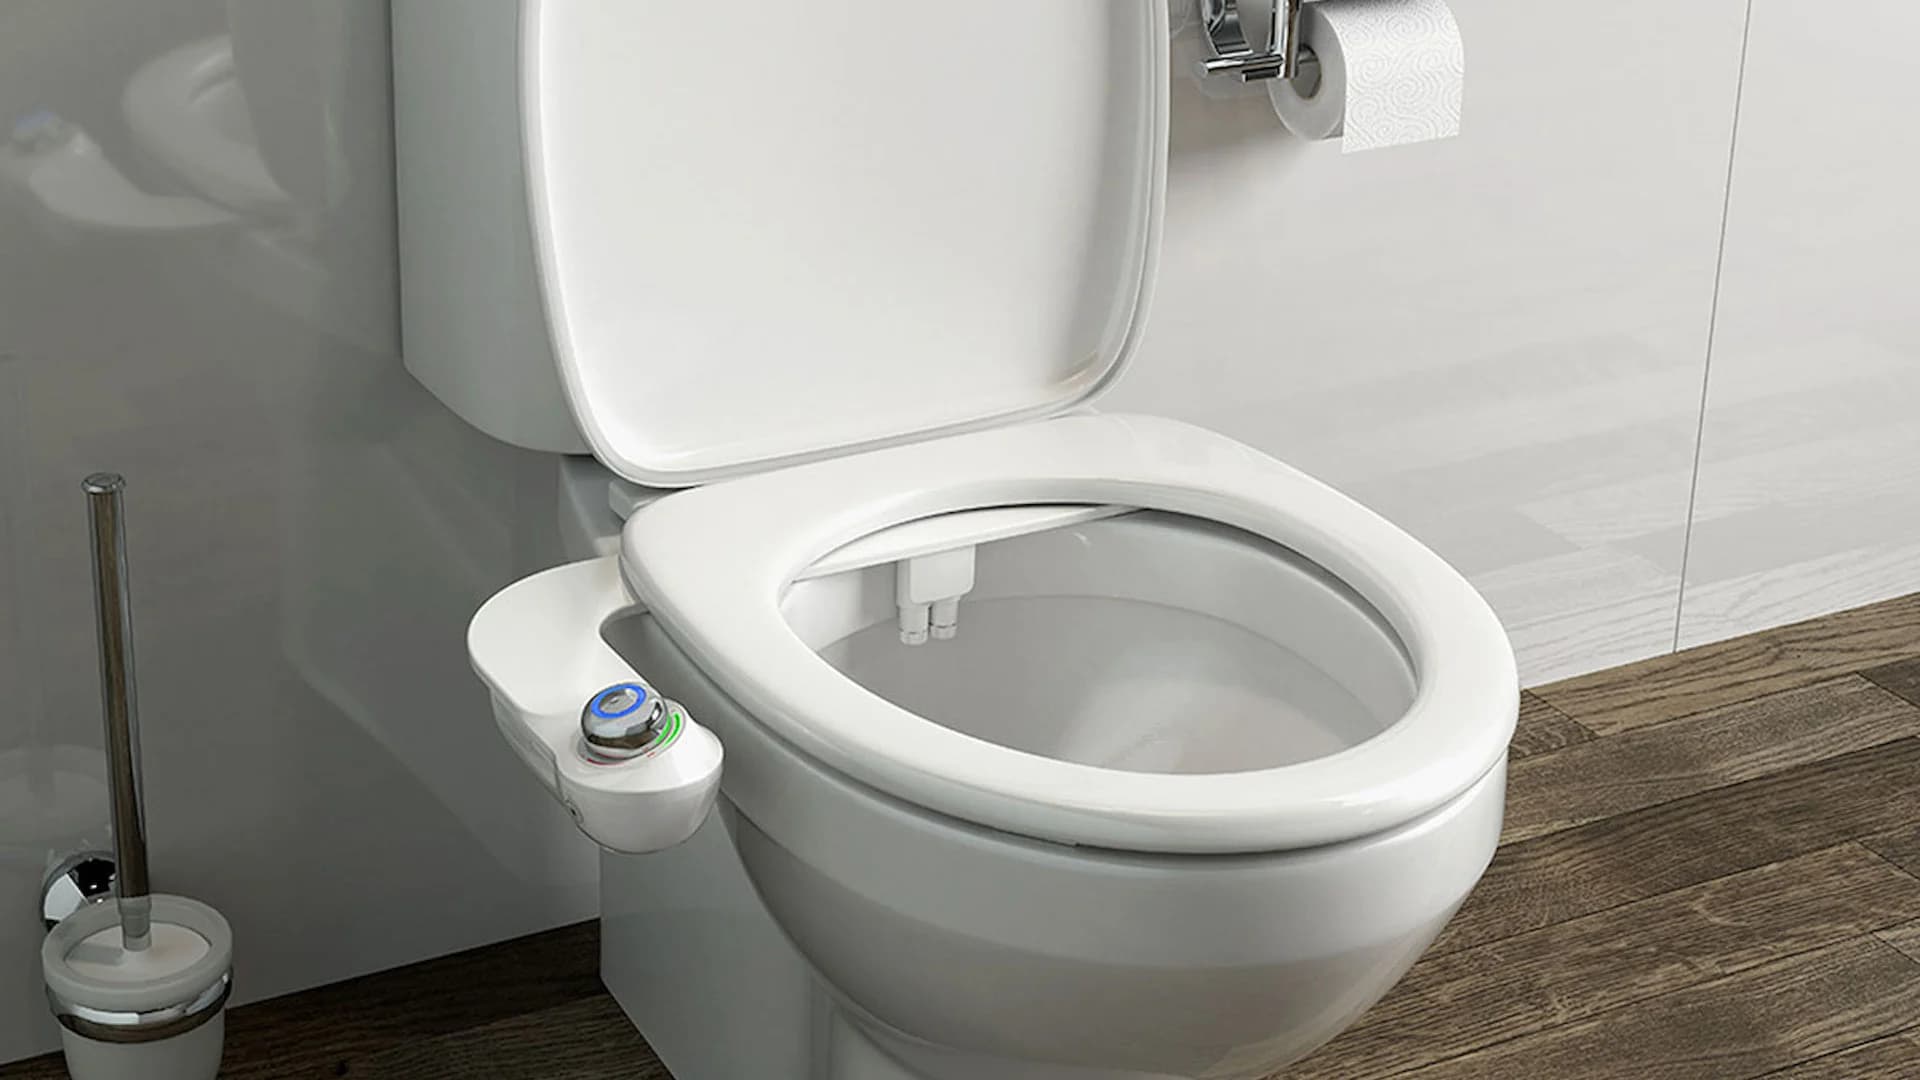 This bidet attachment will make you want to say goodbye to toilet paper